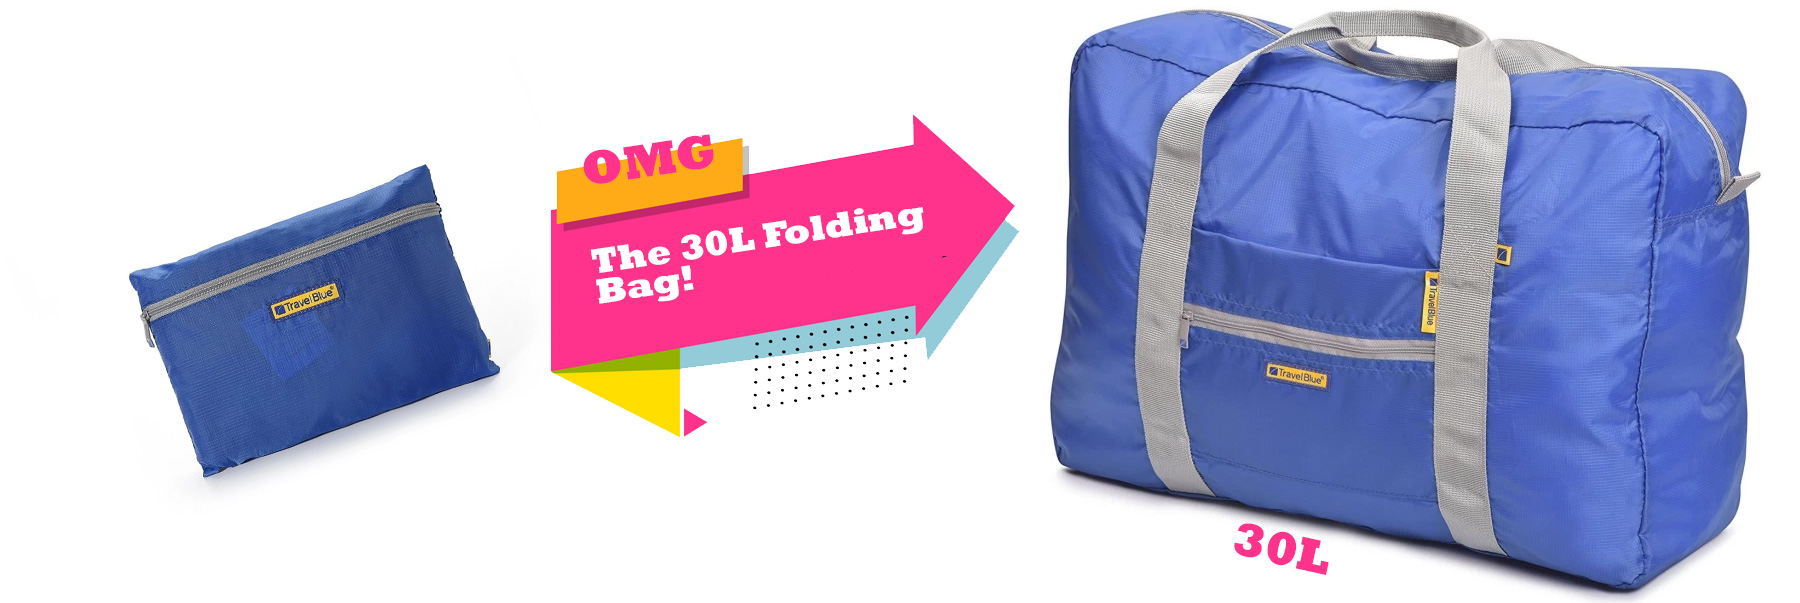 5 Reasons to Take a Folding Bag When Travelling (+ Giveaway!)